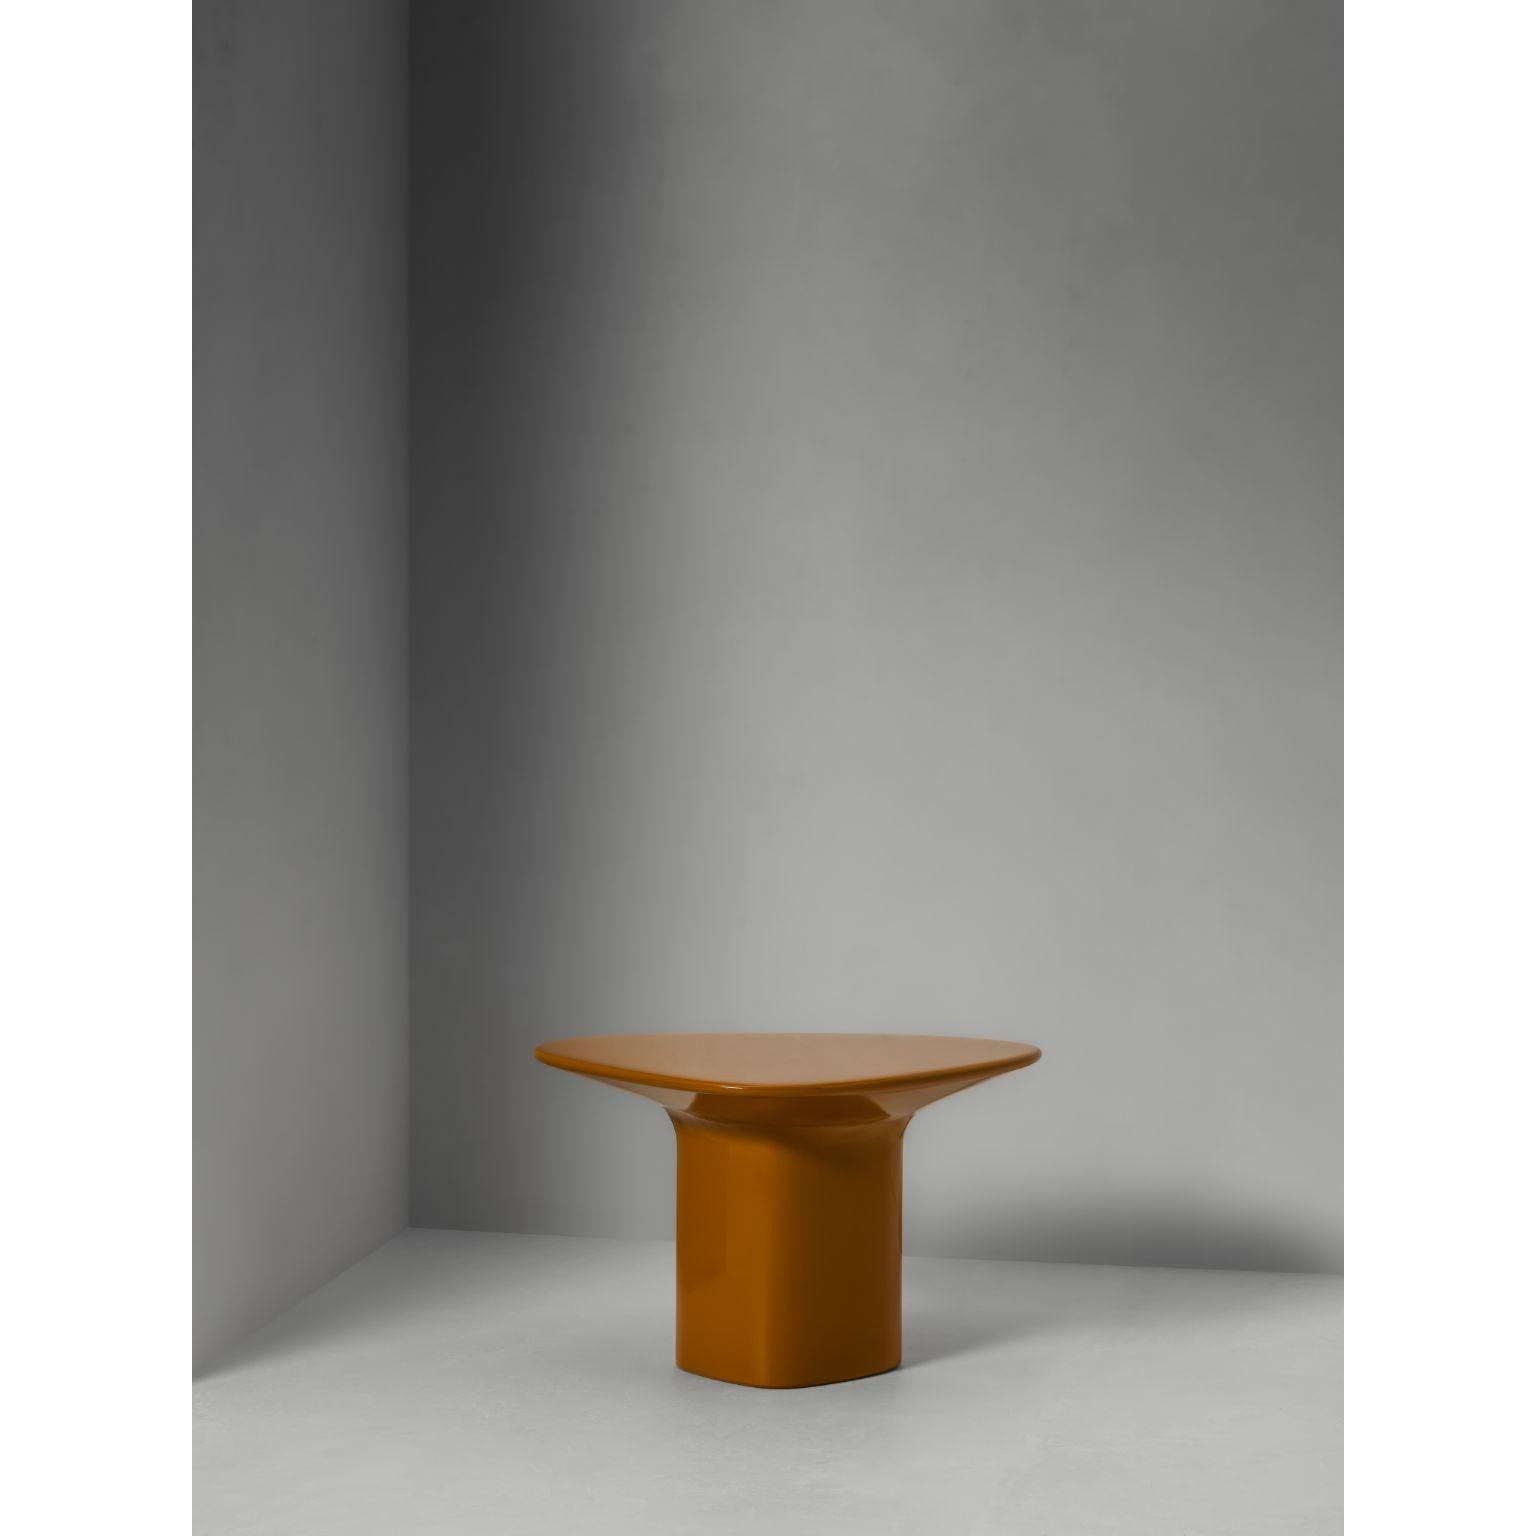 Anvil High Gloss Side Table by Van Rossum
Dimensions: L 63 x W 58 x H 45 cm
Materials: High-Gloss Indian Yellow

For over 40 years, Van Rossum has designed and handmade solid and sustainable furniture from the workshop in Bergharen, the Netherlands.